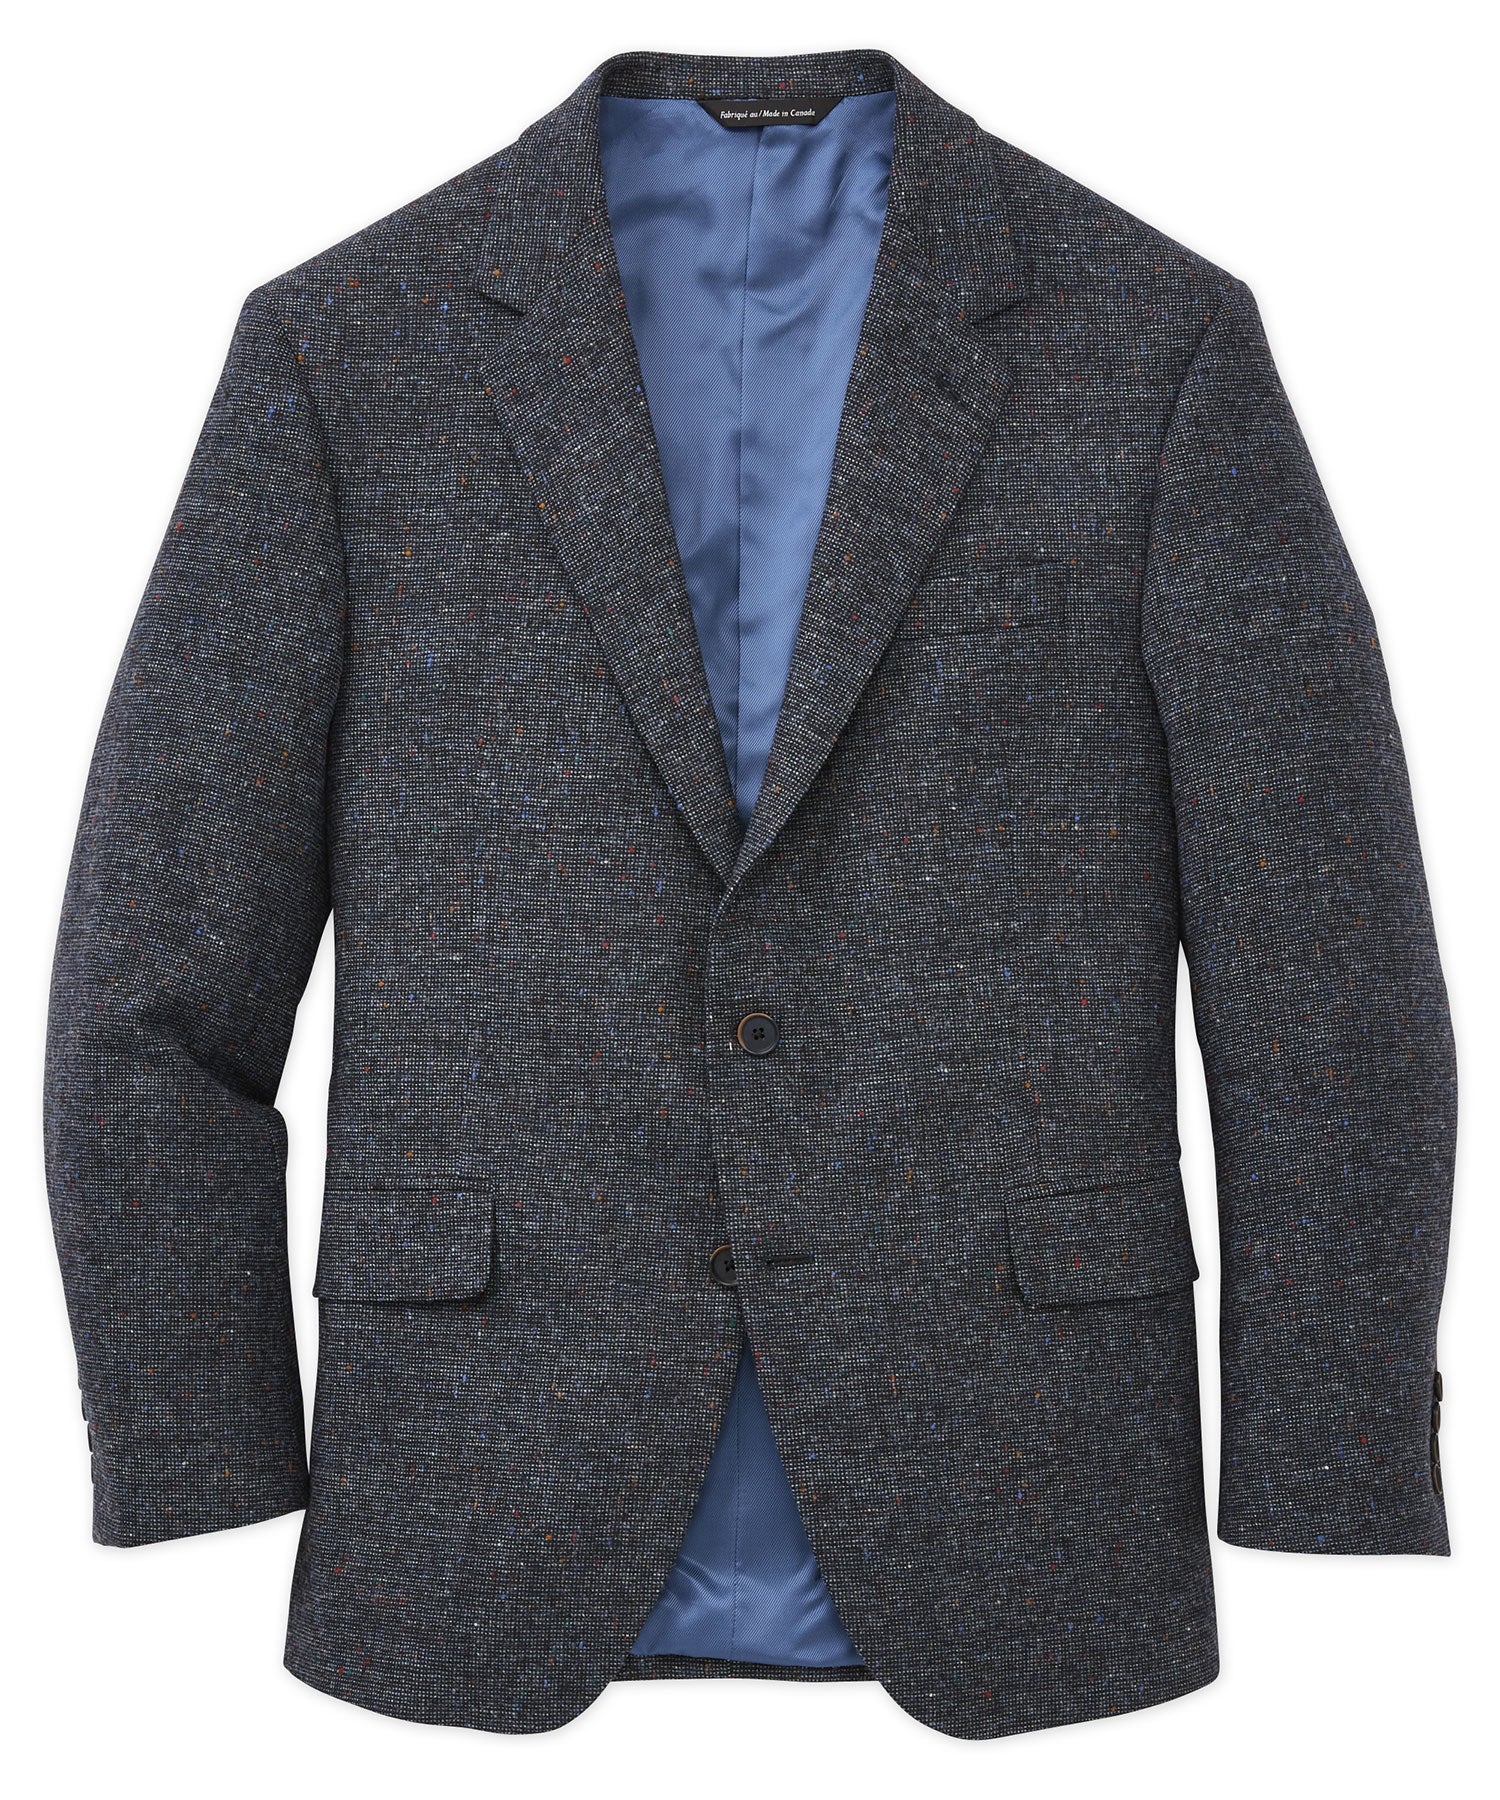 Coppley 2 Button Donegal Sport Coat